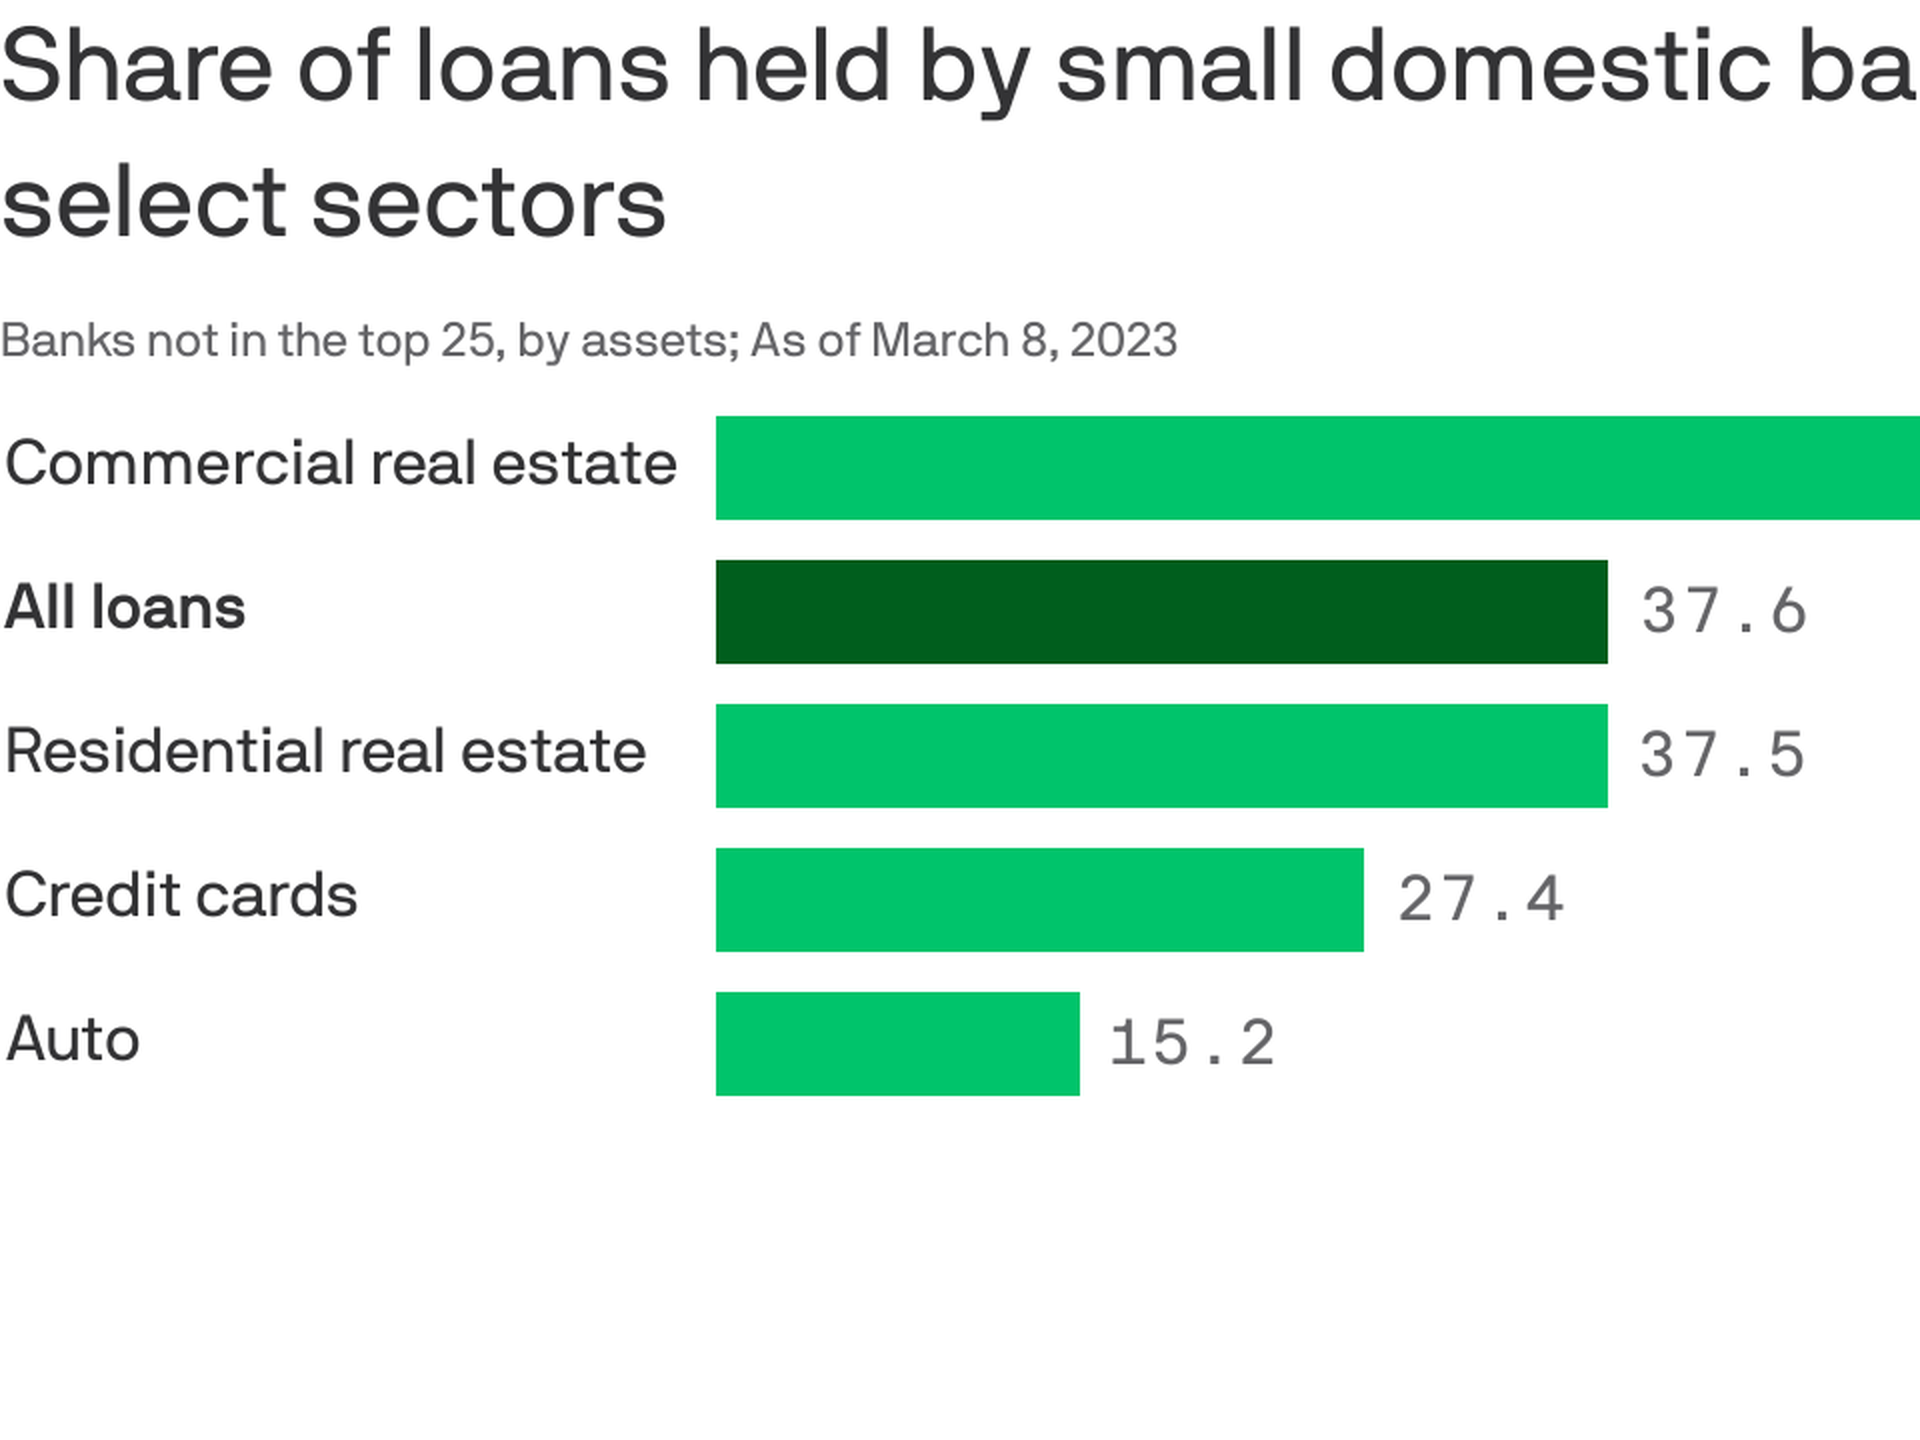 Small banks hold nearly 70% of commercial real estate loans